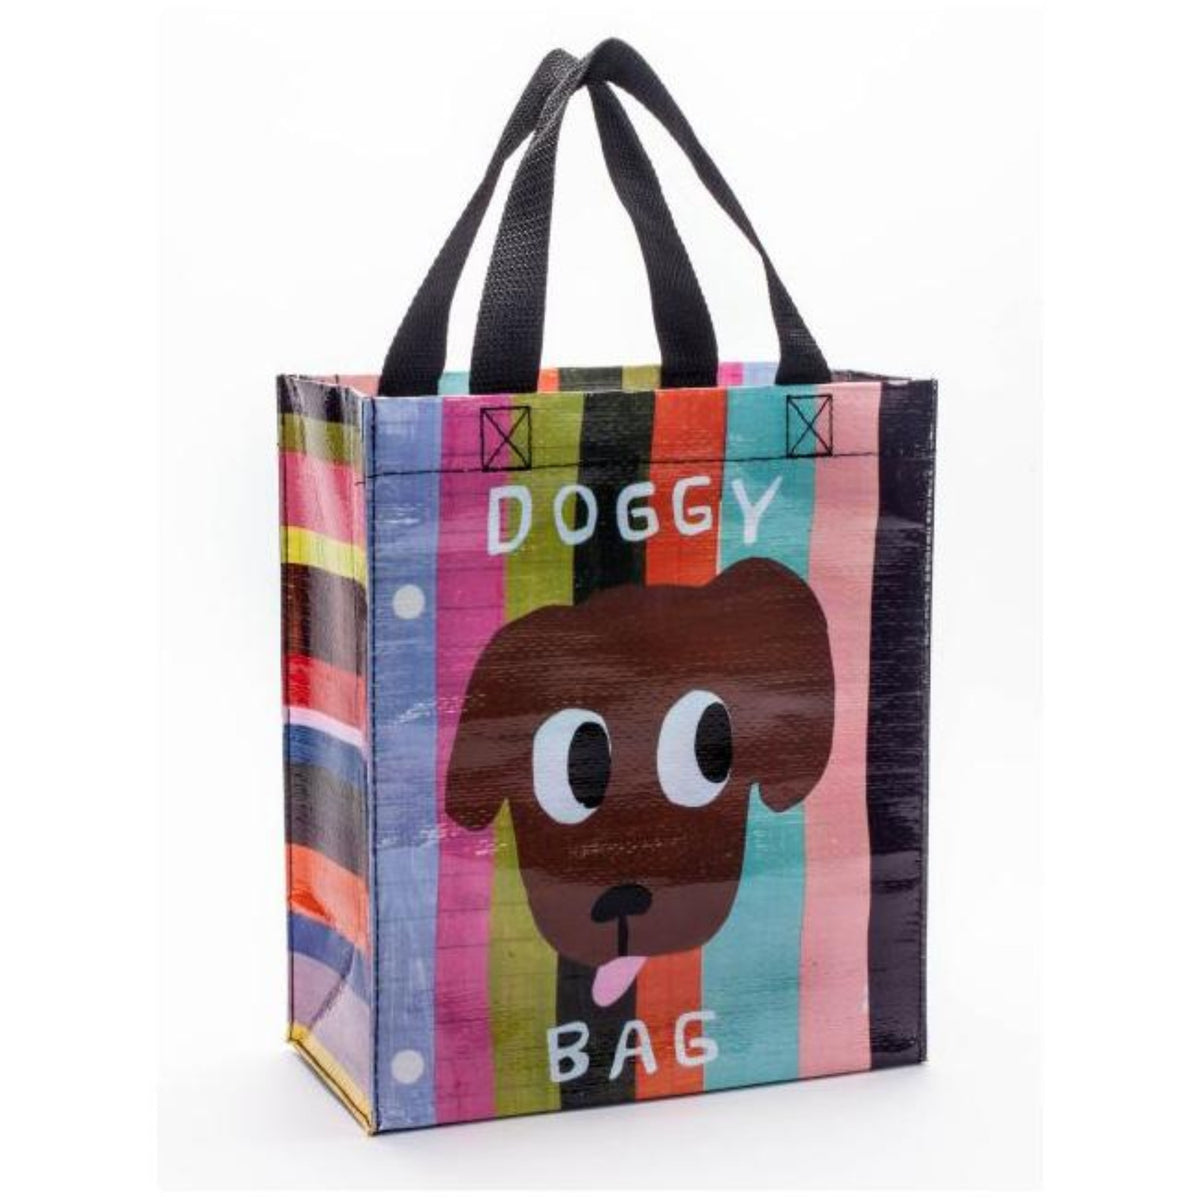 Doggy Bag Colorful Handy Tote